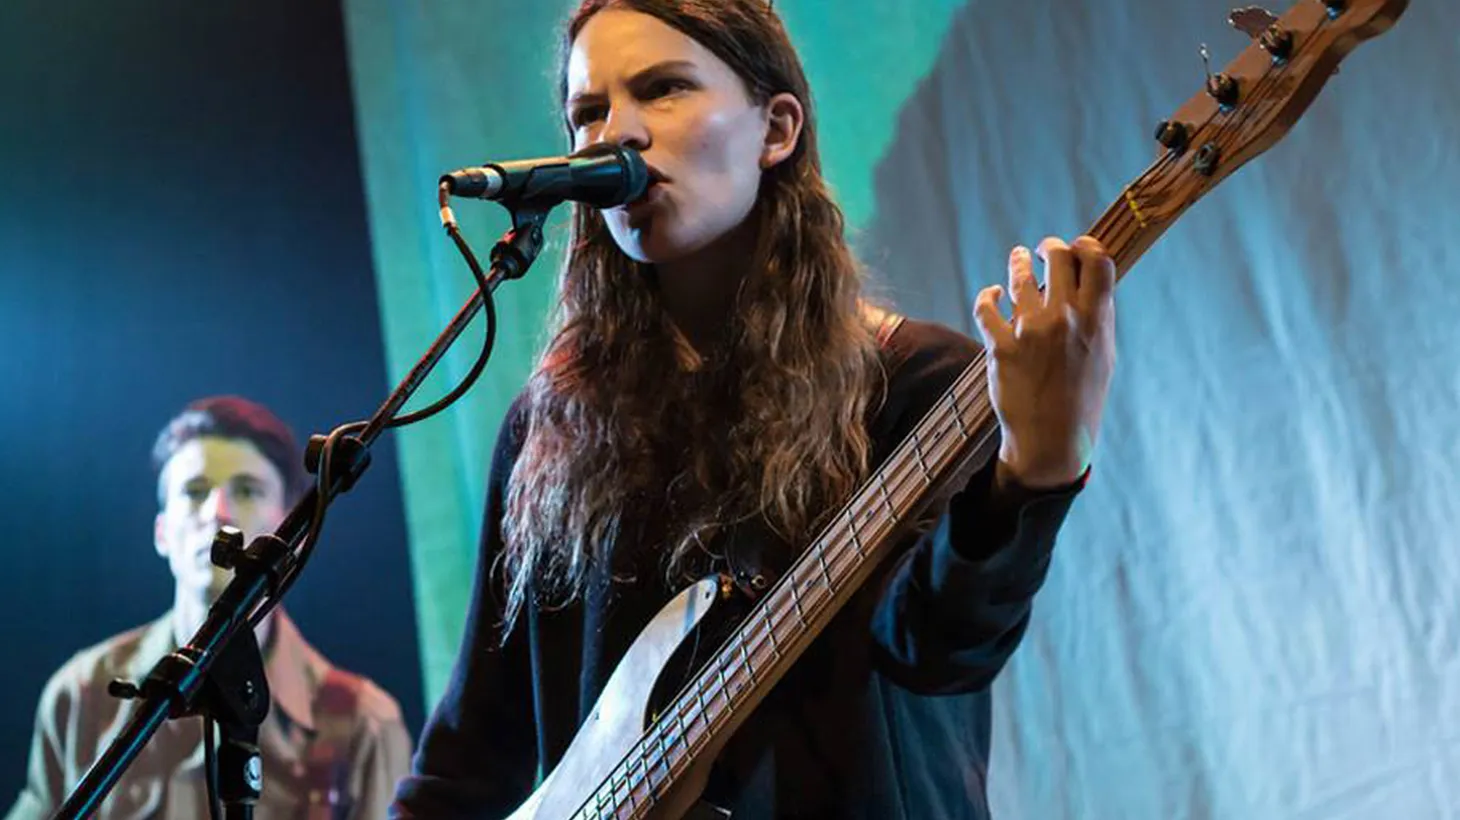 Eliot Sumner has music in her blood and a sound that is very much her own.